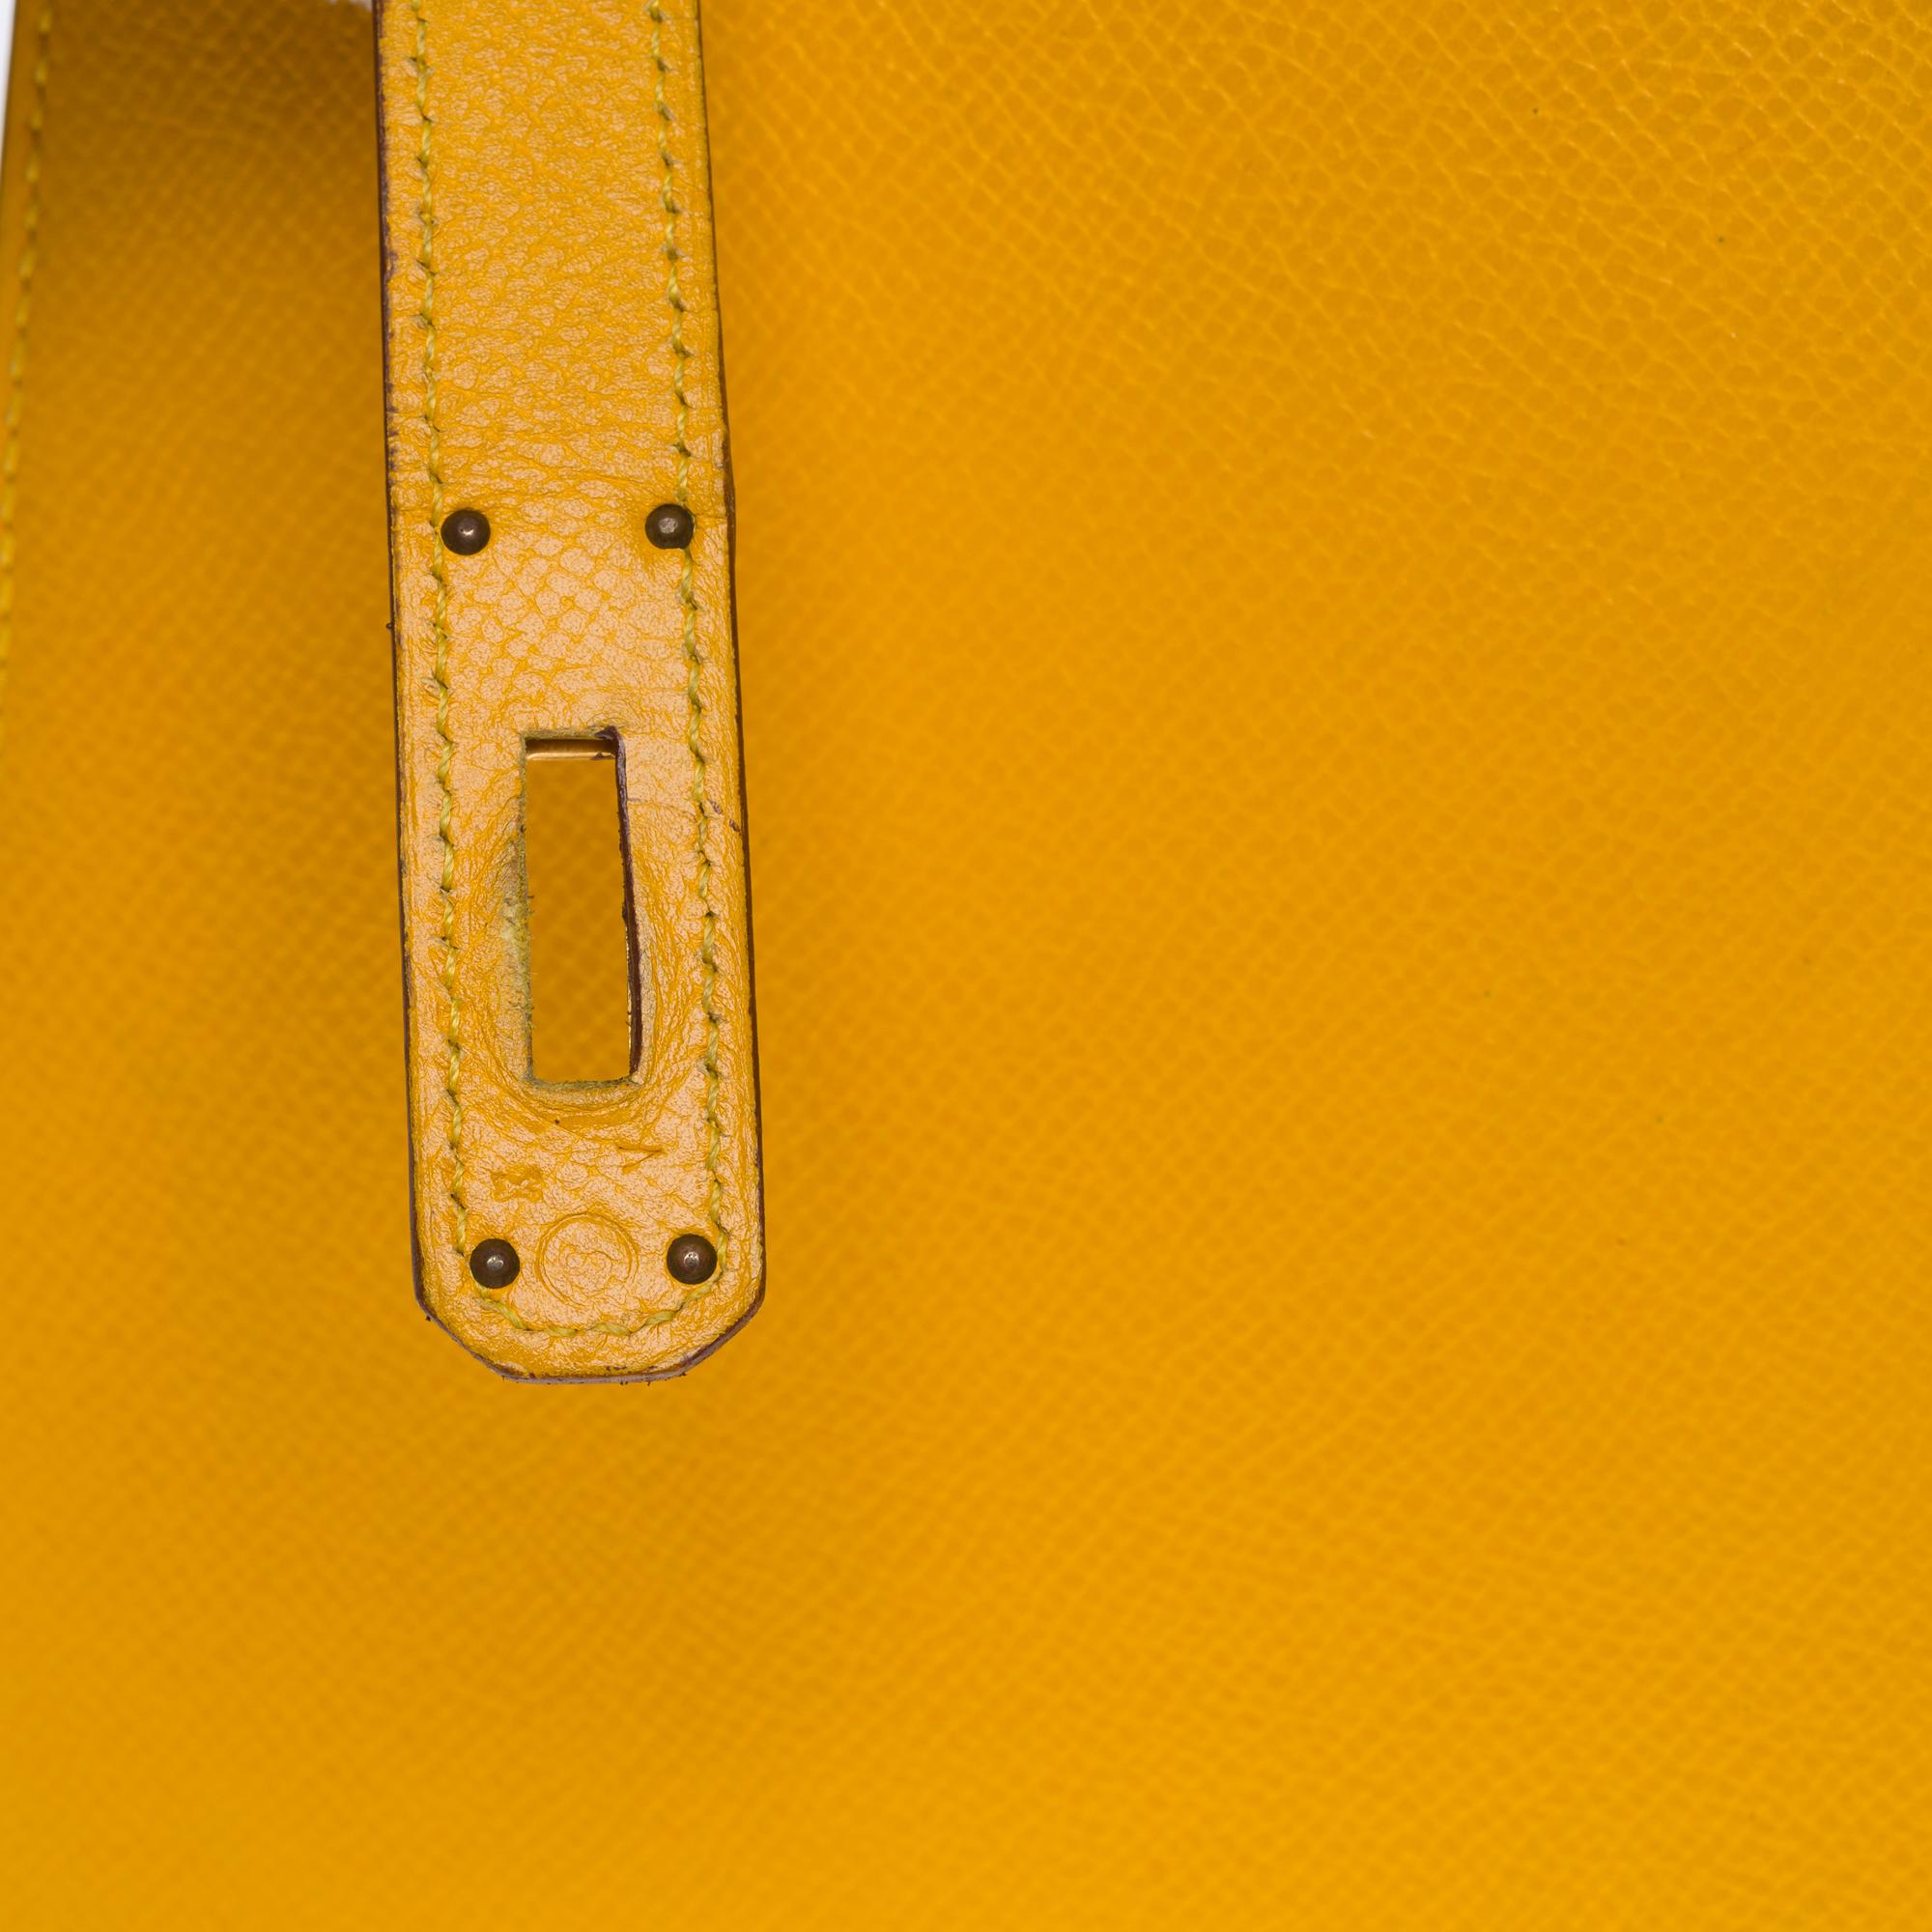 Bright Hermès Kelly 28 sellier handbag strap in Courchevel Yellow leather, GHW 2